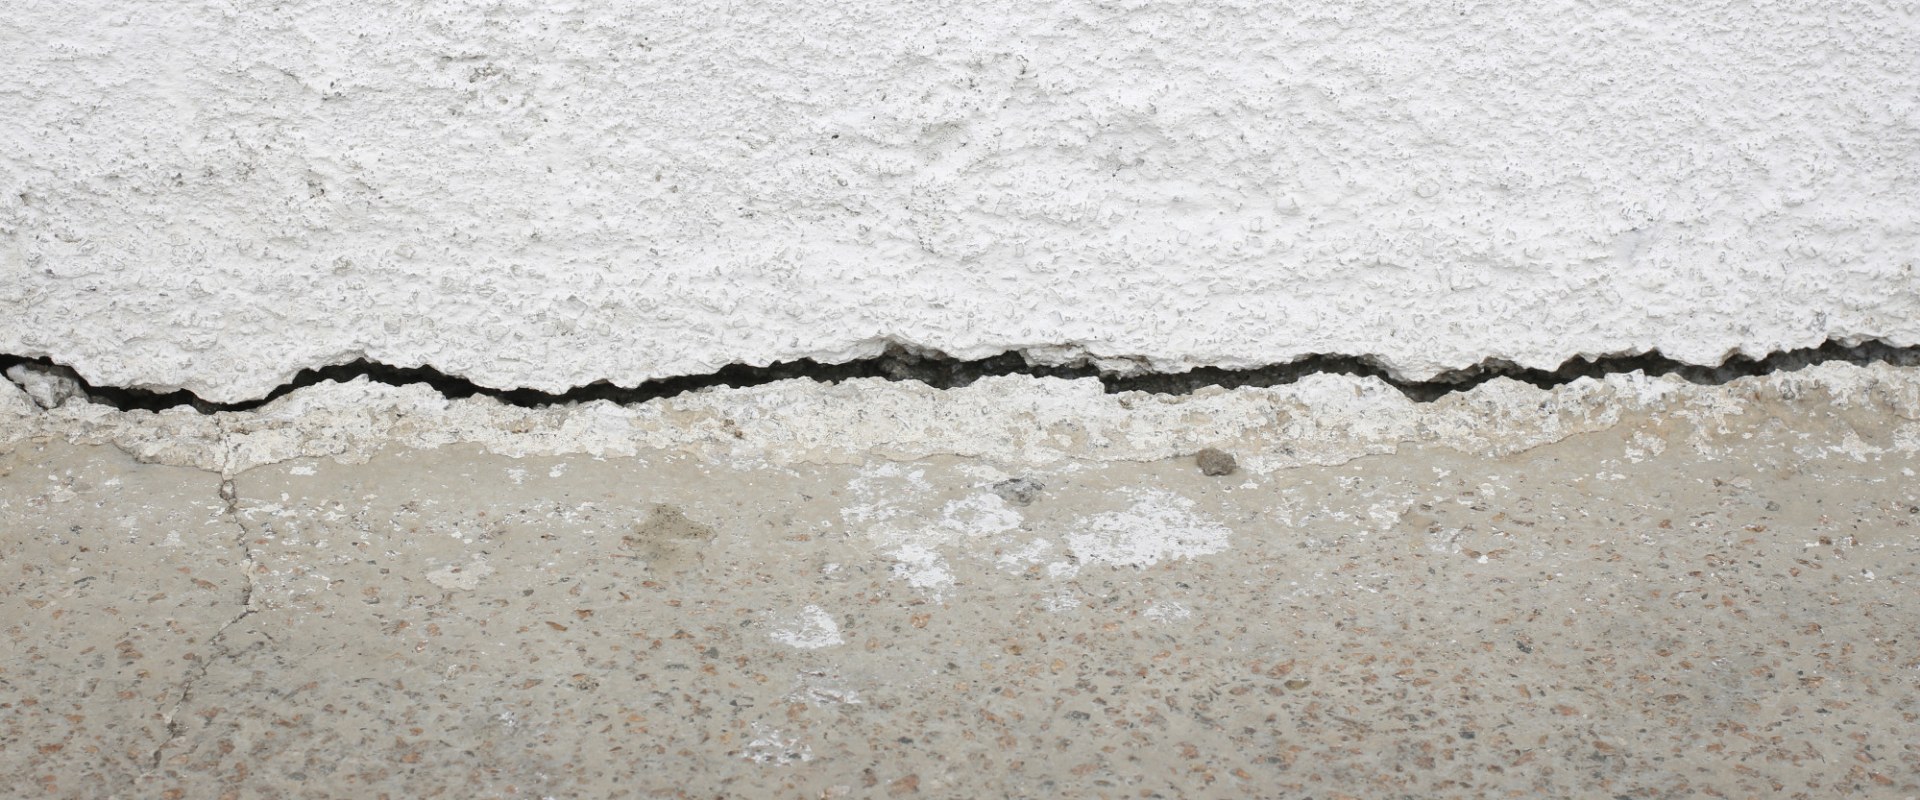 Is it okay to have cracks in the foundation?